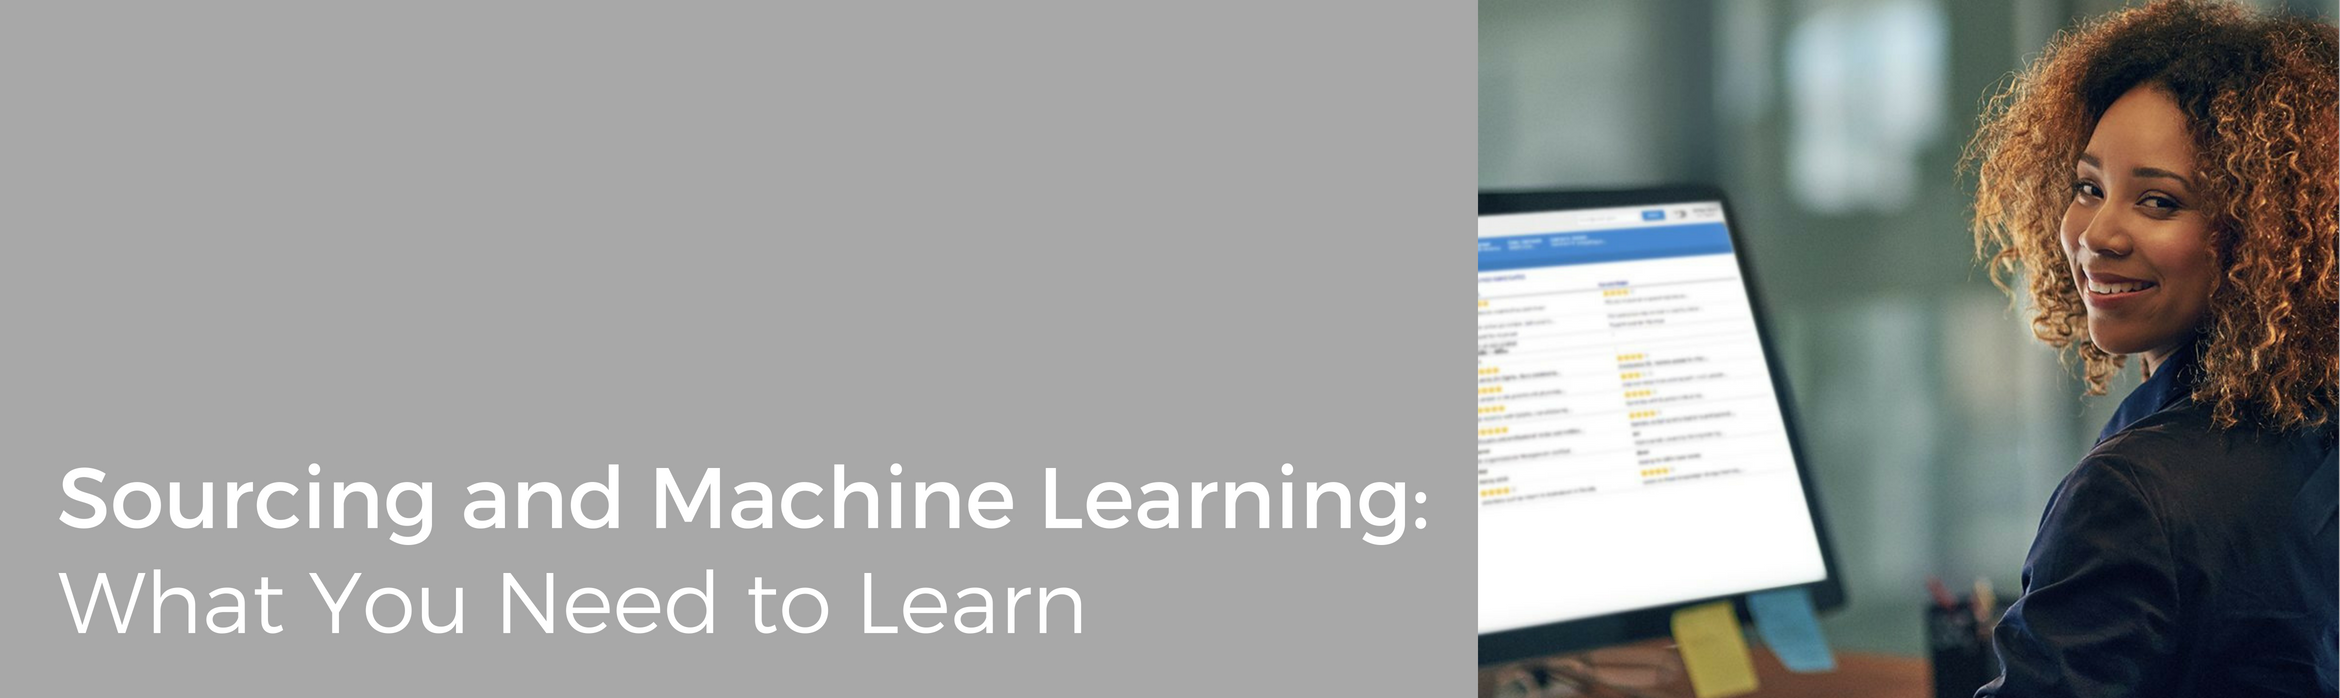 Sourcing and Machine Learning: What You Need to Learn